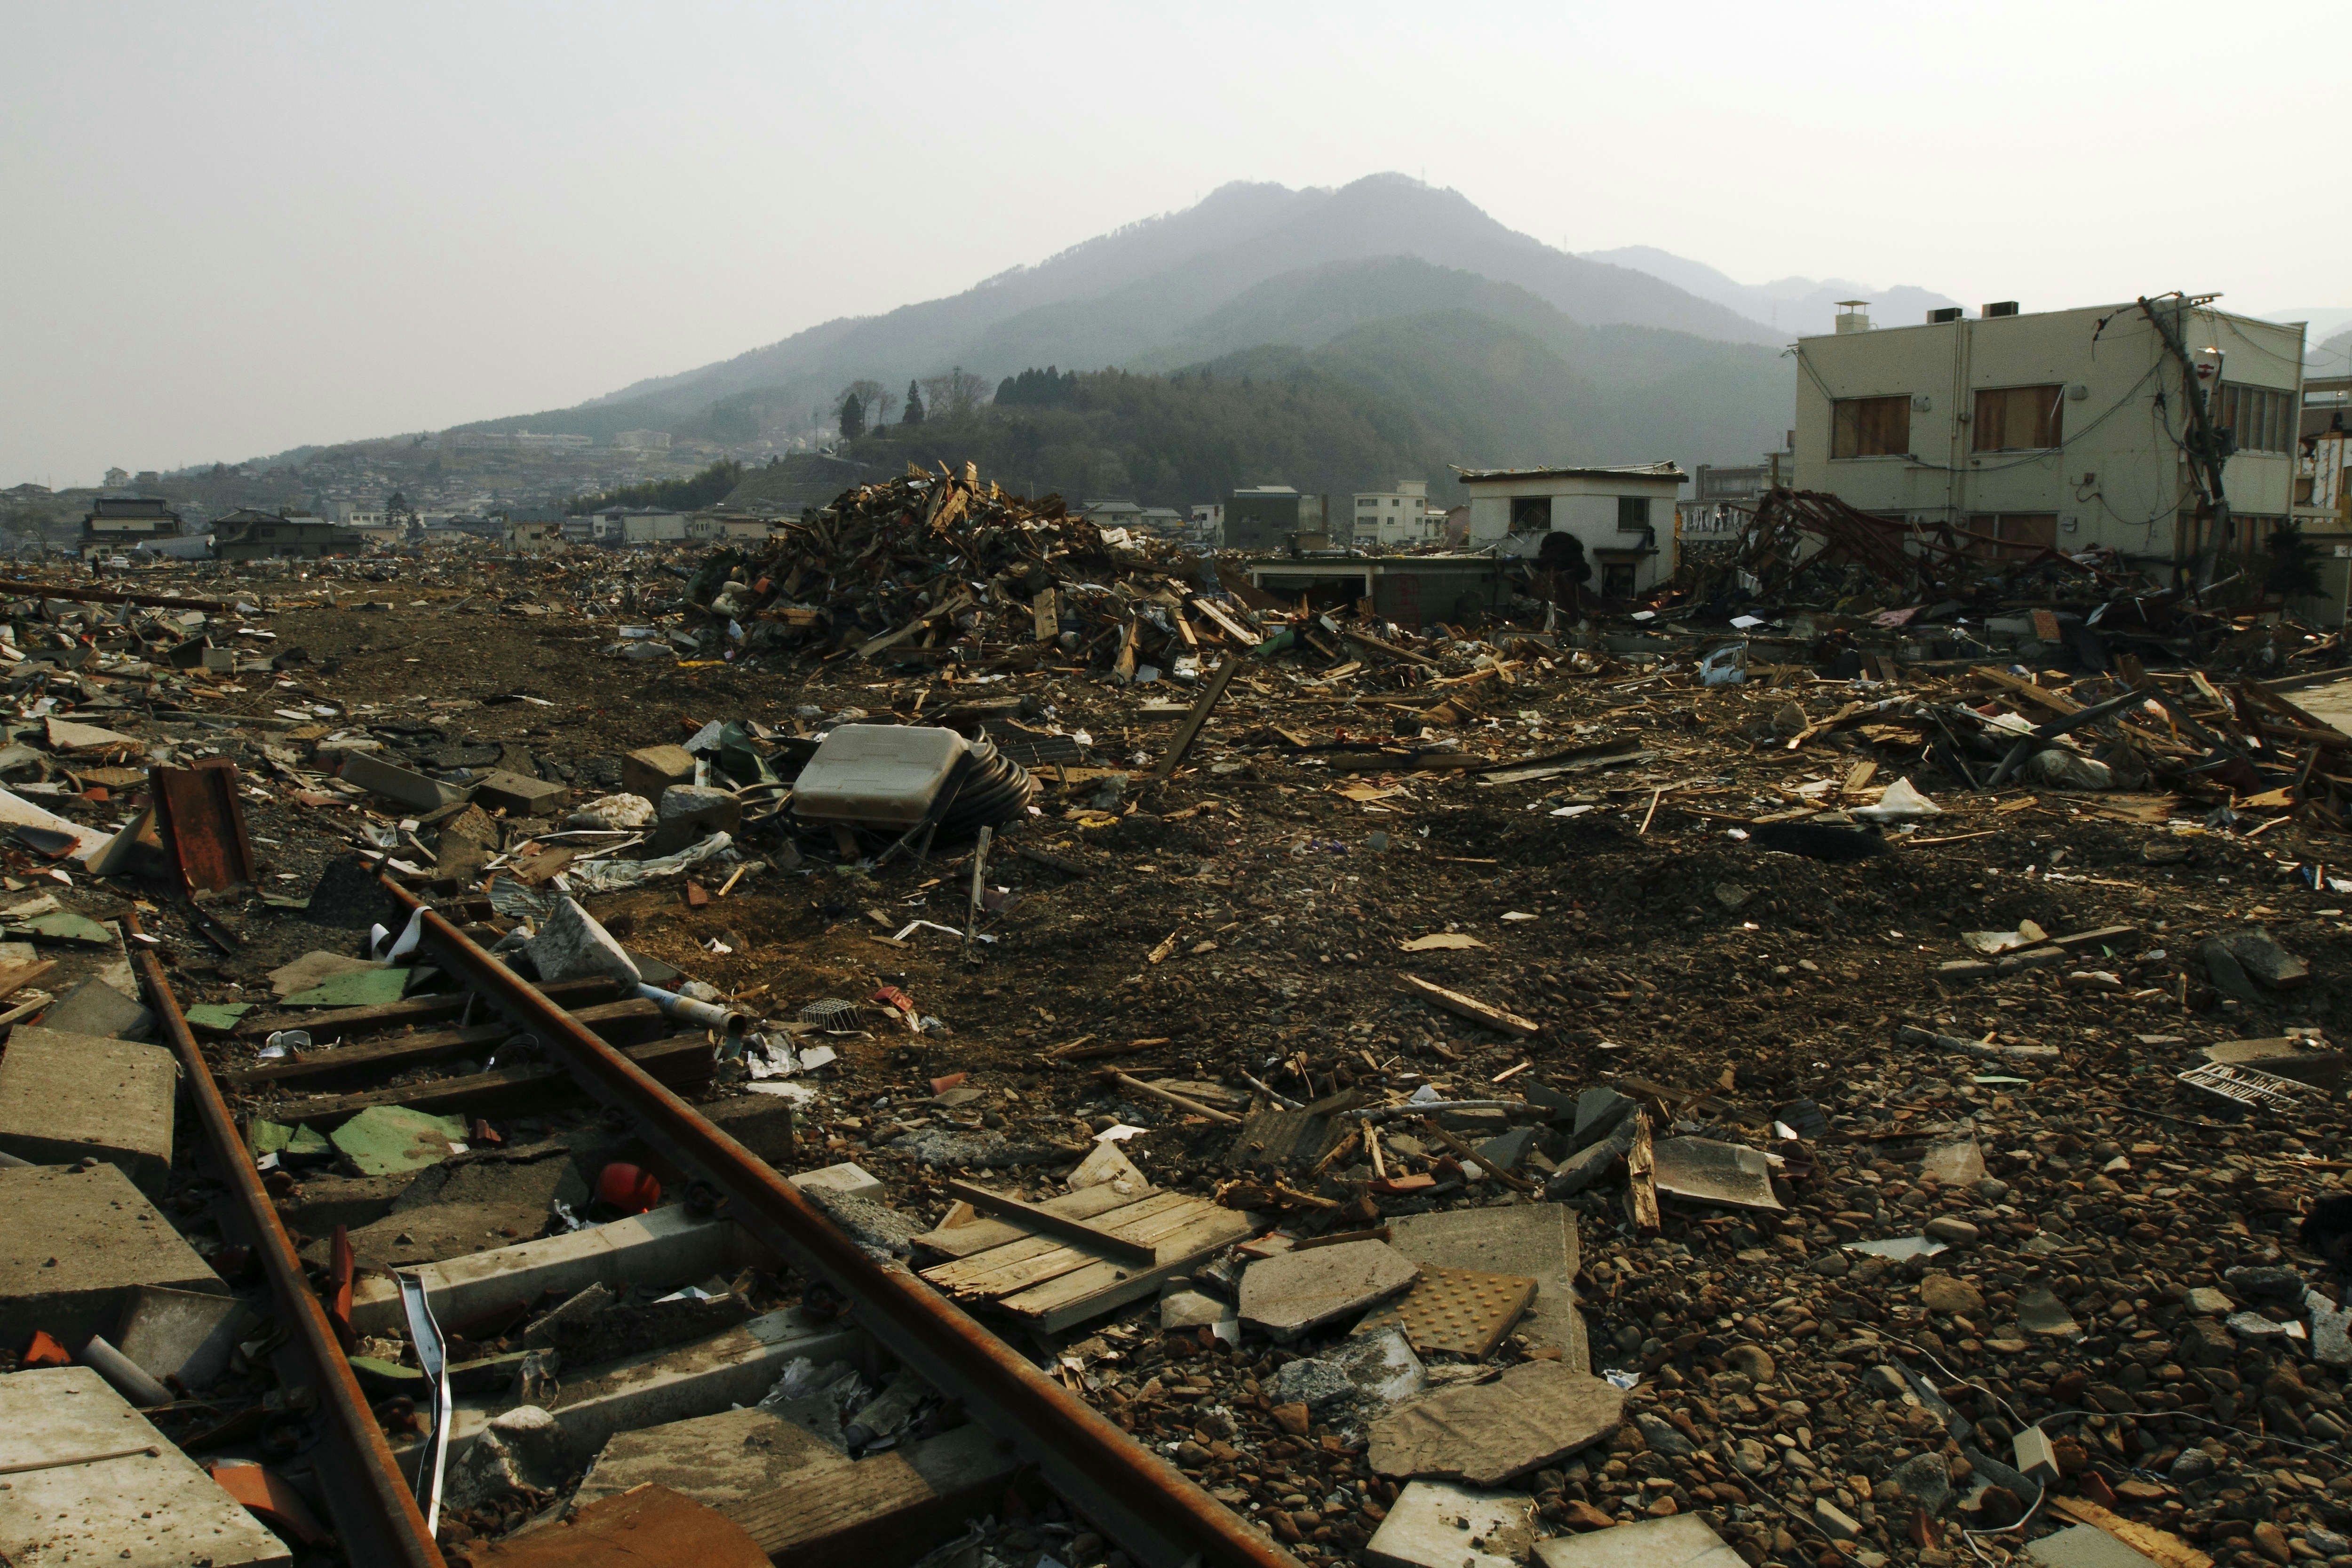 A view of the Japanese city of Ofunato in the aftermath of the 2011 earthquake. Most of the scene is simply rubble, with a train track visible, buried beneath it. A few houses still stand, and in the background, a green mountain peak is visible.